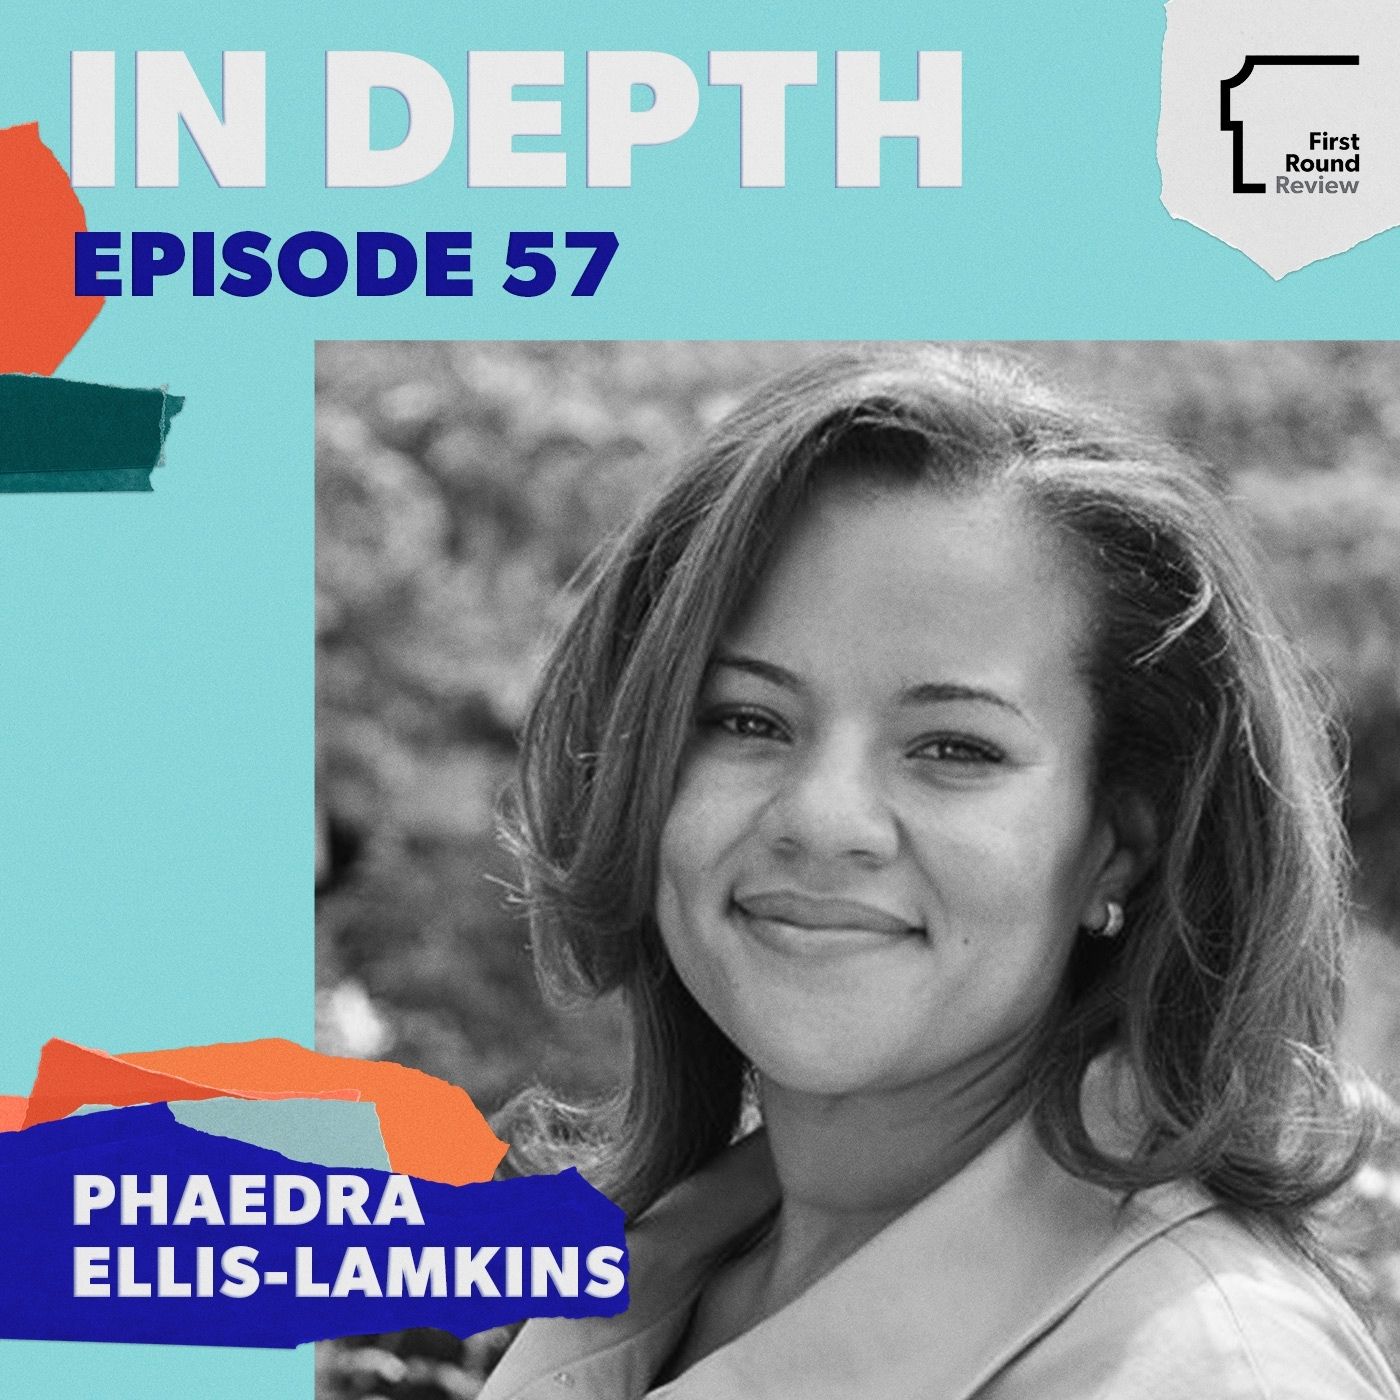 Building & selling a product into government is tricky — Phaedra Ellis-Lamkins shares critical advice for getting it right